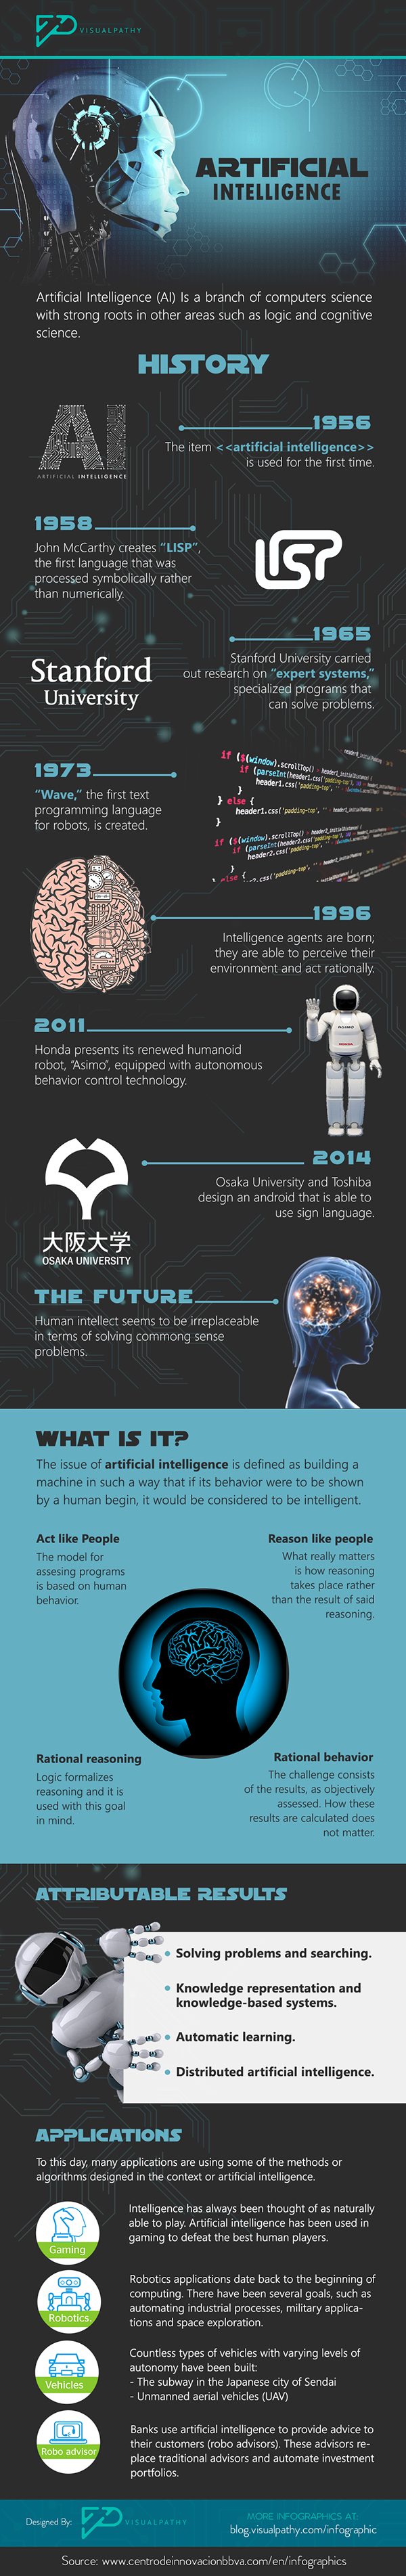 Infographic: What is artificial intelligence?